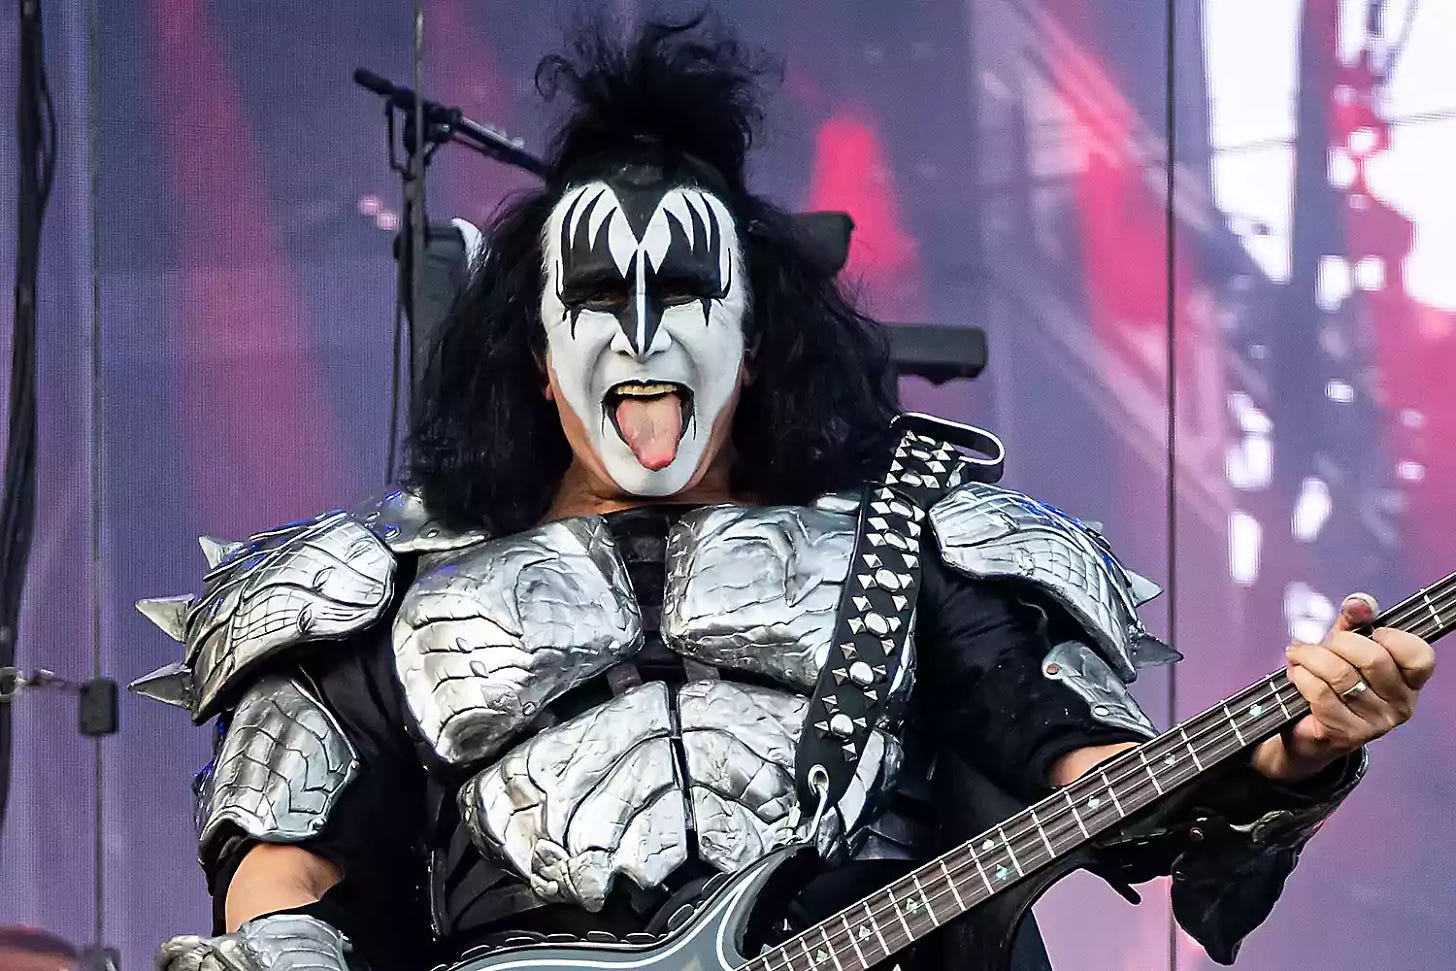 Gene Simmons of Kiss on stage at the Tons of Rock festival on June 27, 2019 in Oslo, Norway.